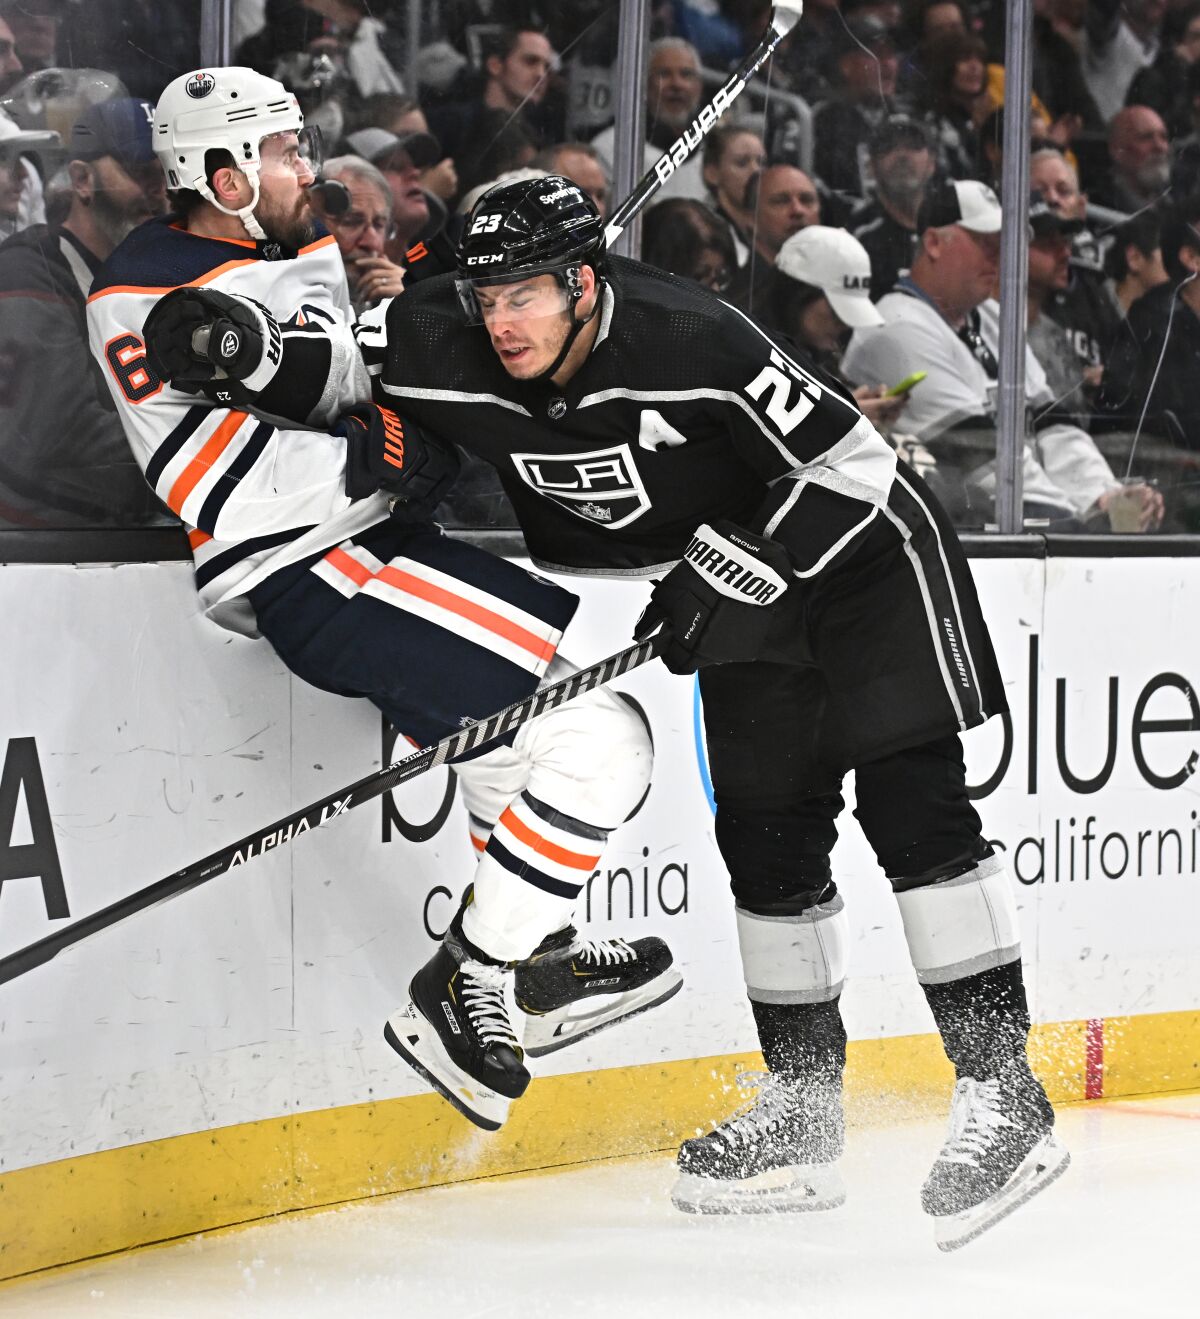 Dustin Brown checks Edmonton's Kris Russell into the boards.